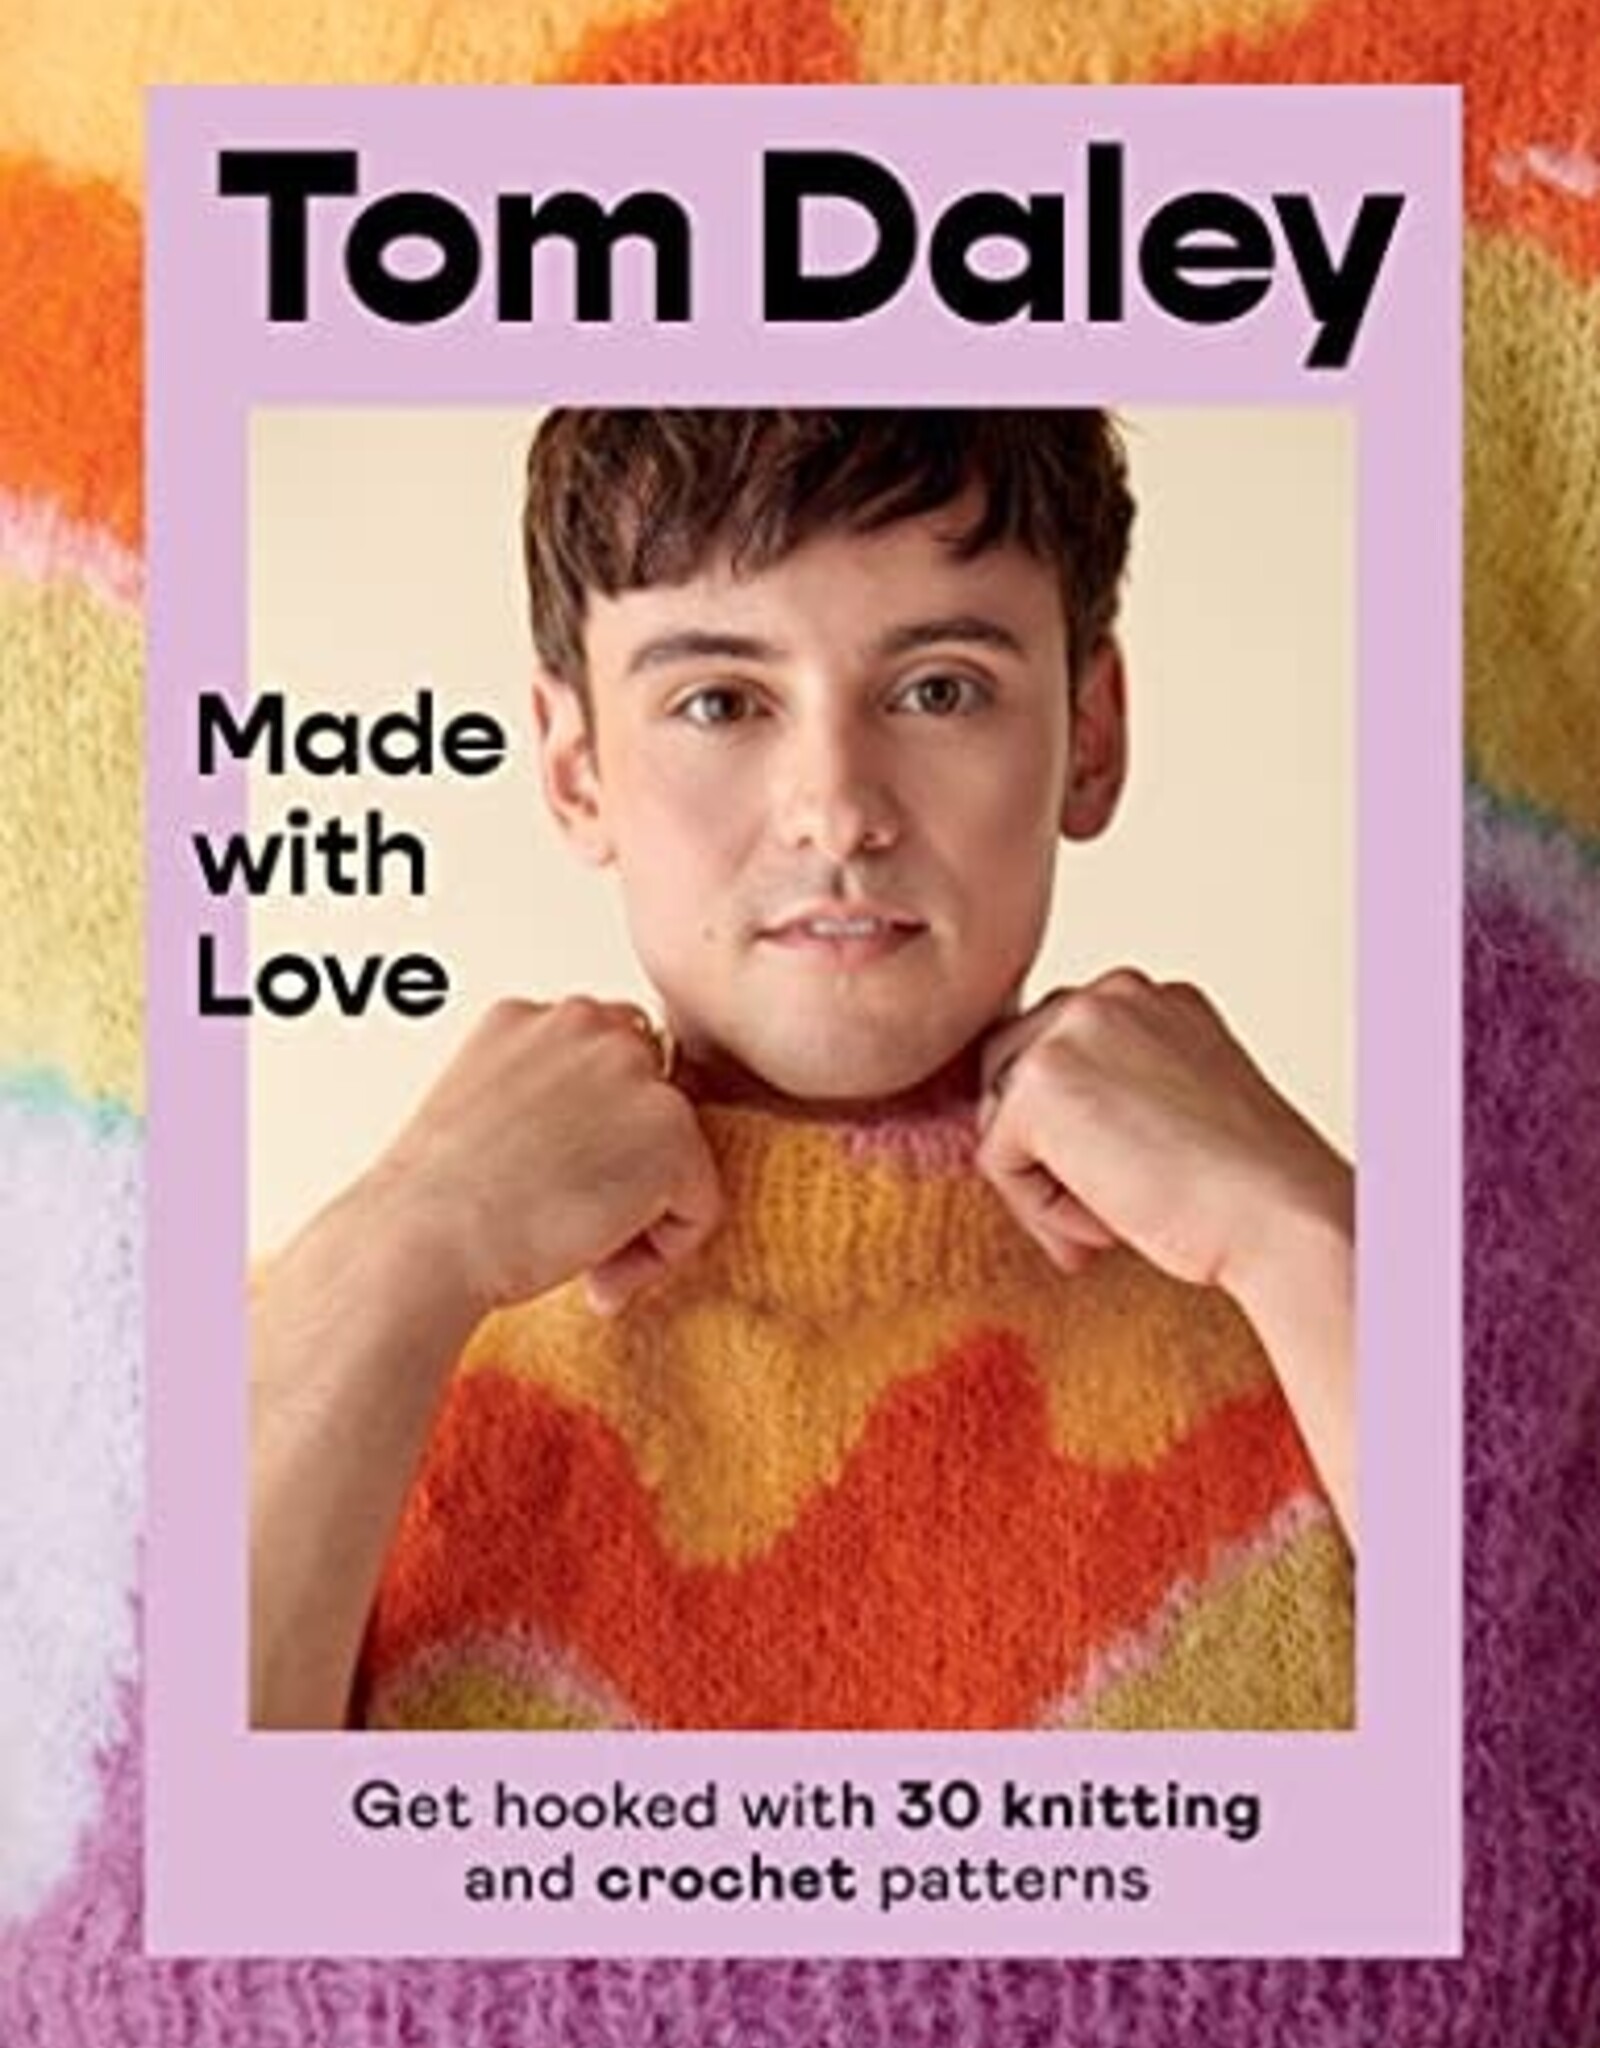 Tom Daley - Made With Love